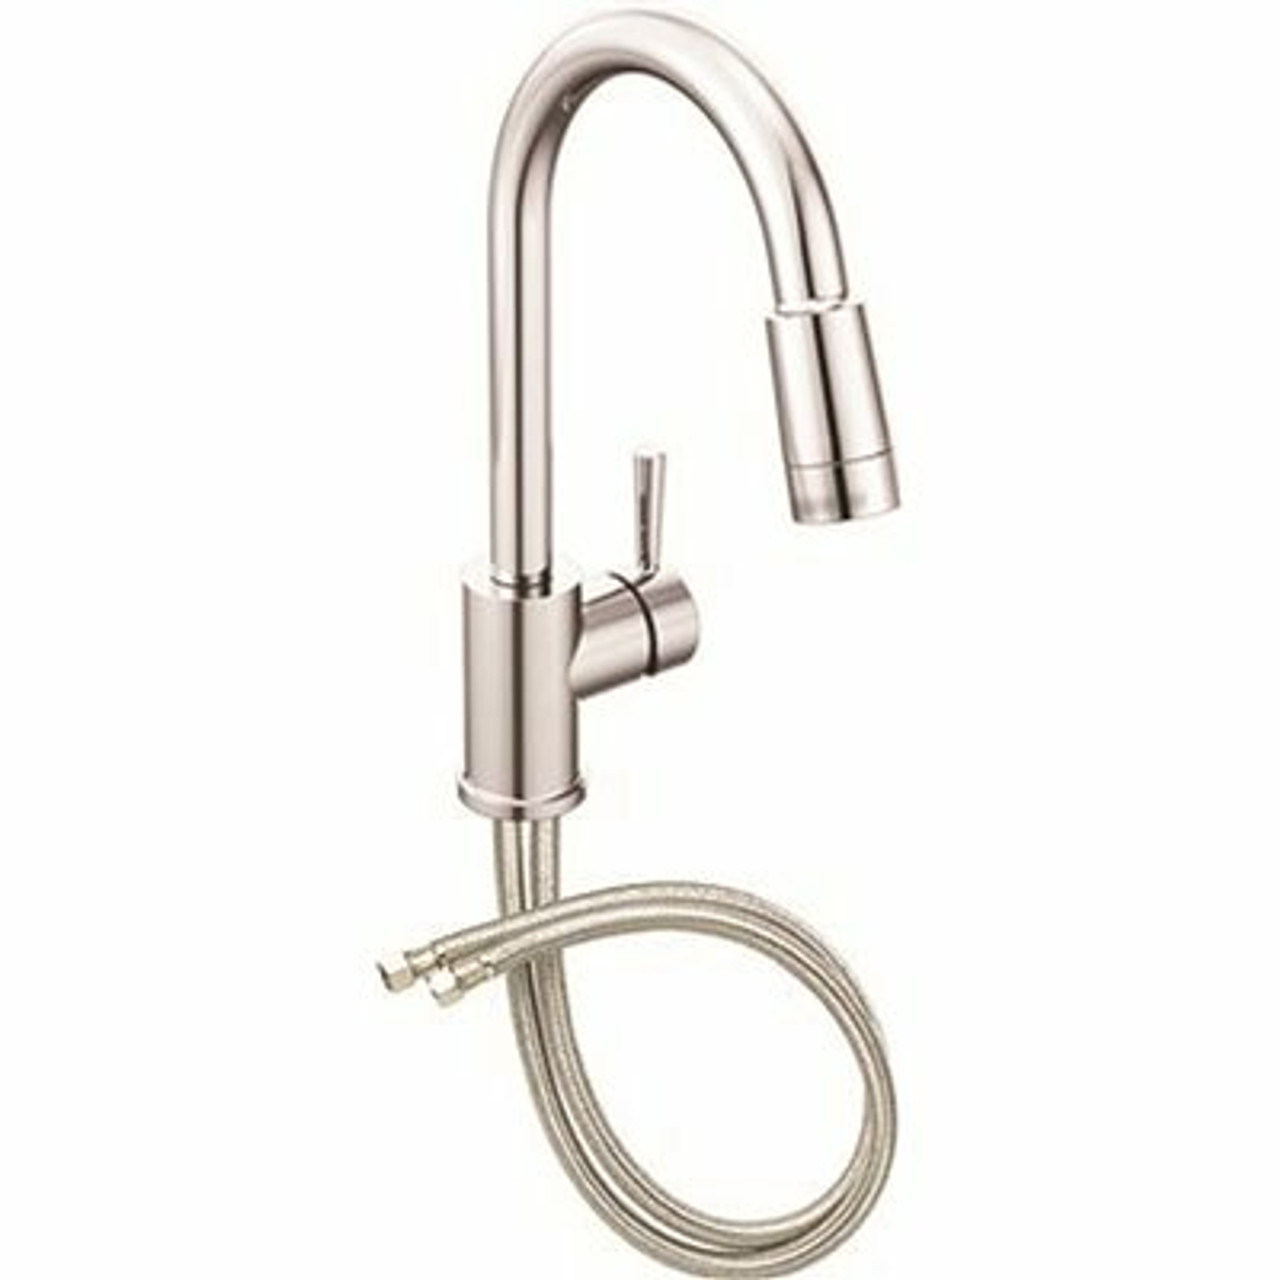 Cleveland Faucet Group Edgestone Single-Handle Pull-Down Sprayer Kitchen Faucet In Chrome